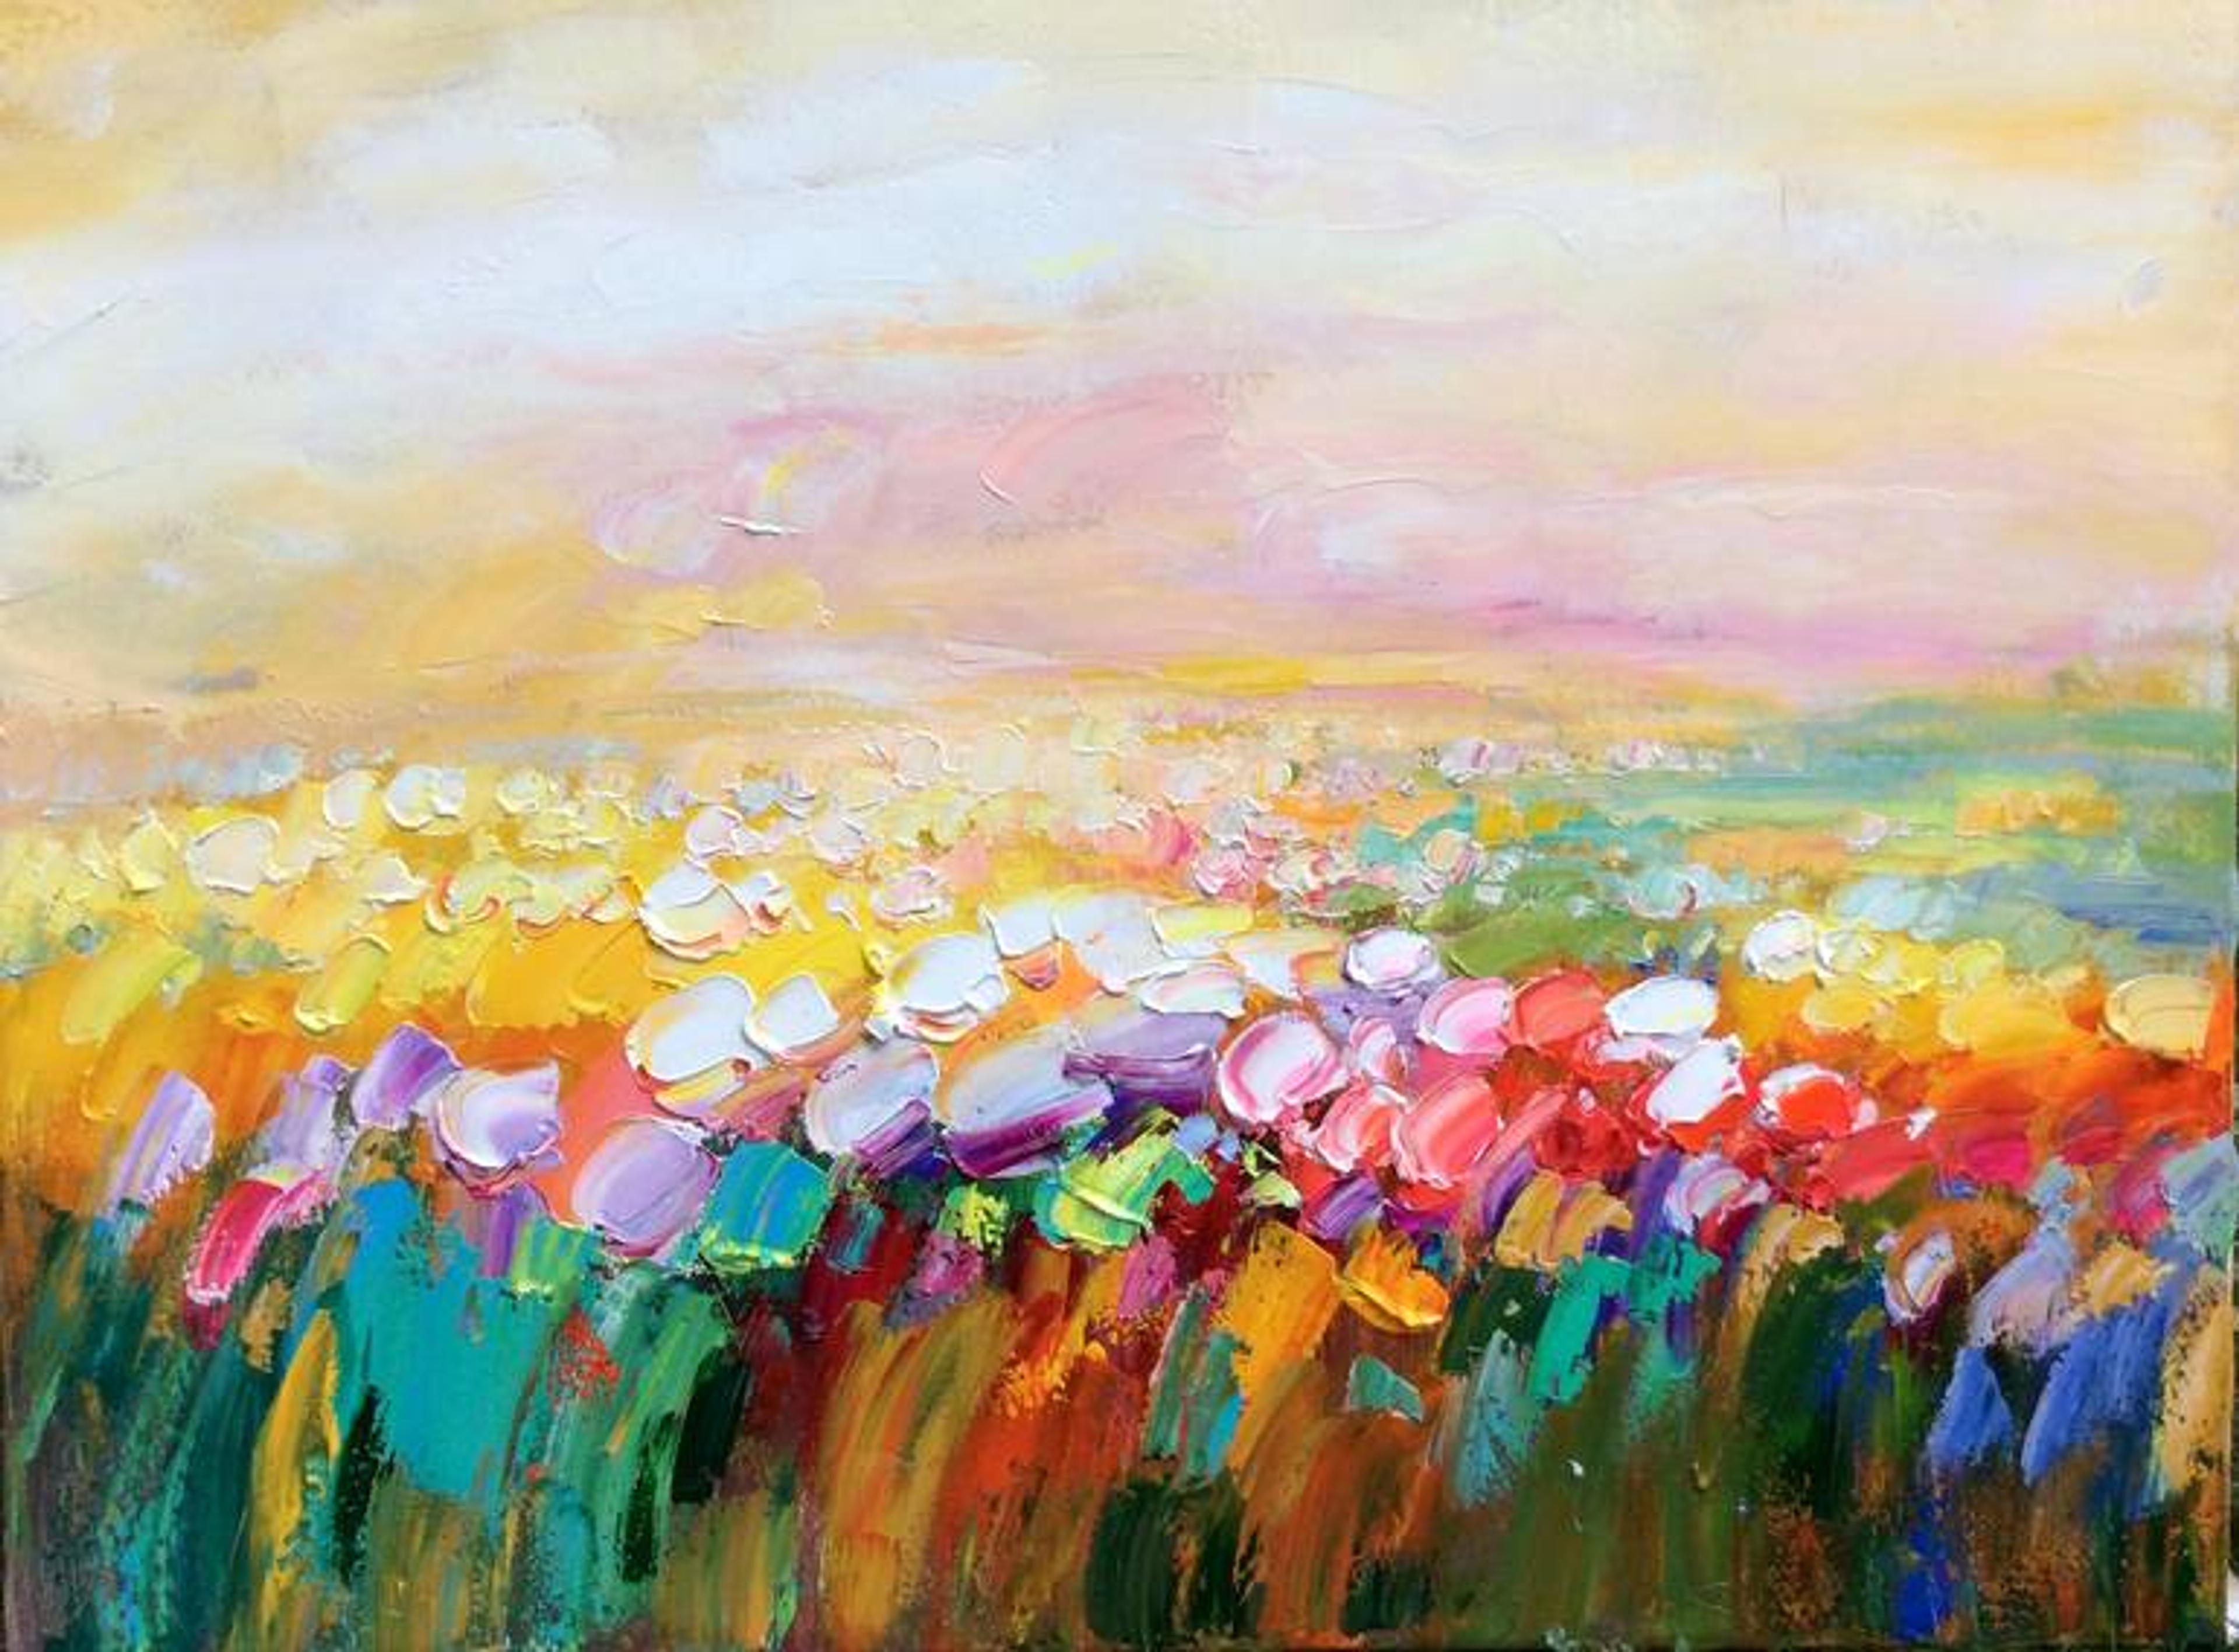 Floral land 1021 Painting by jingshen you | Saatchi Art